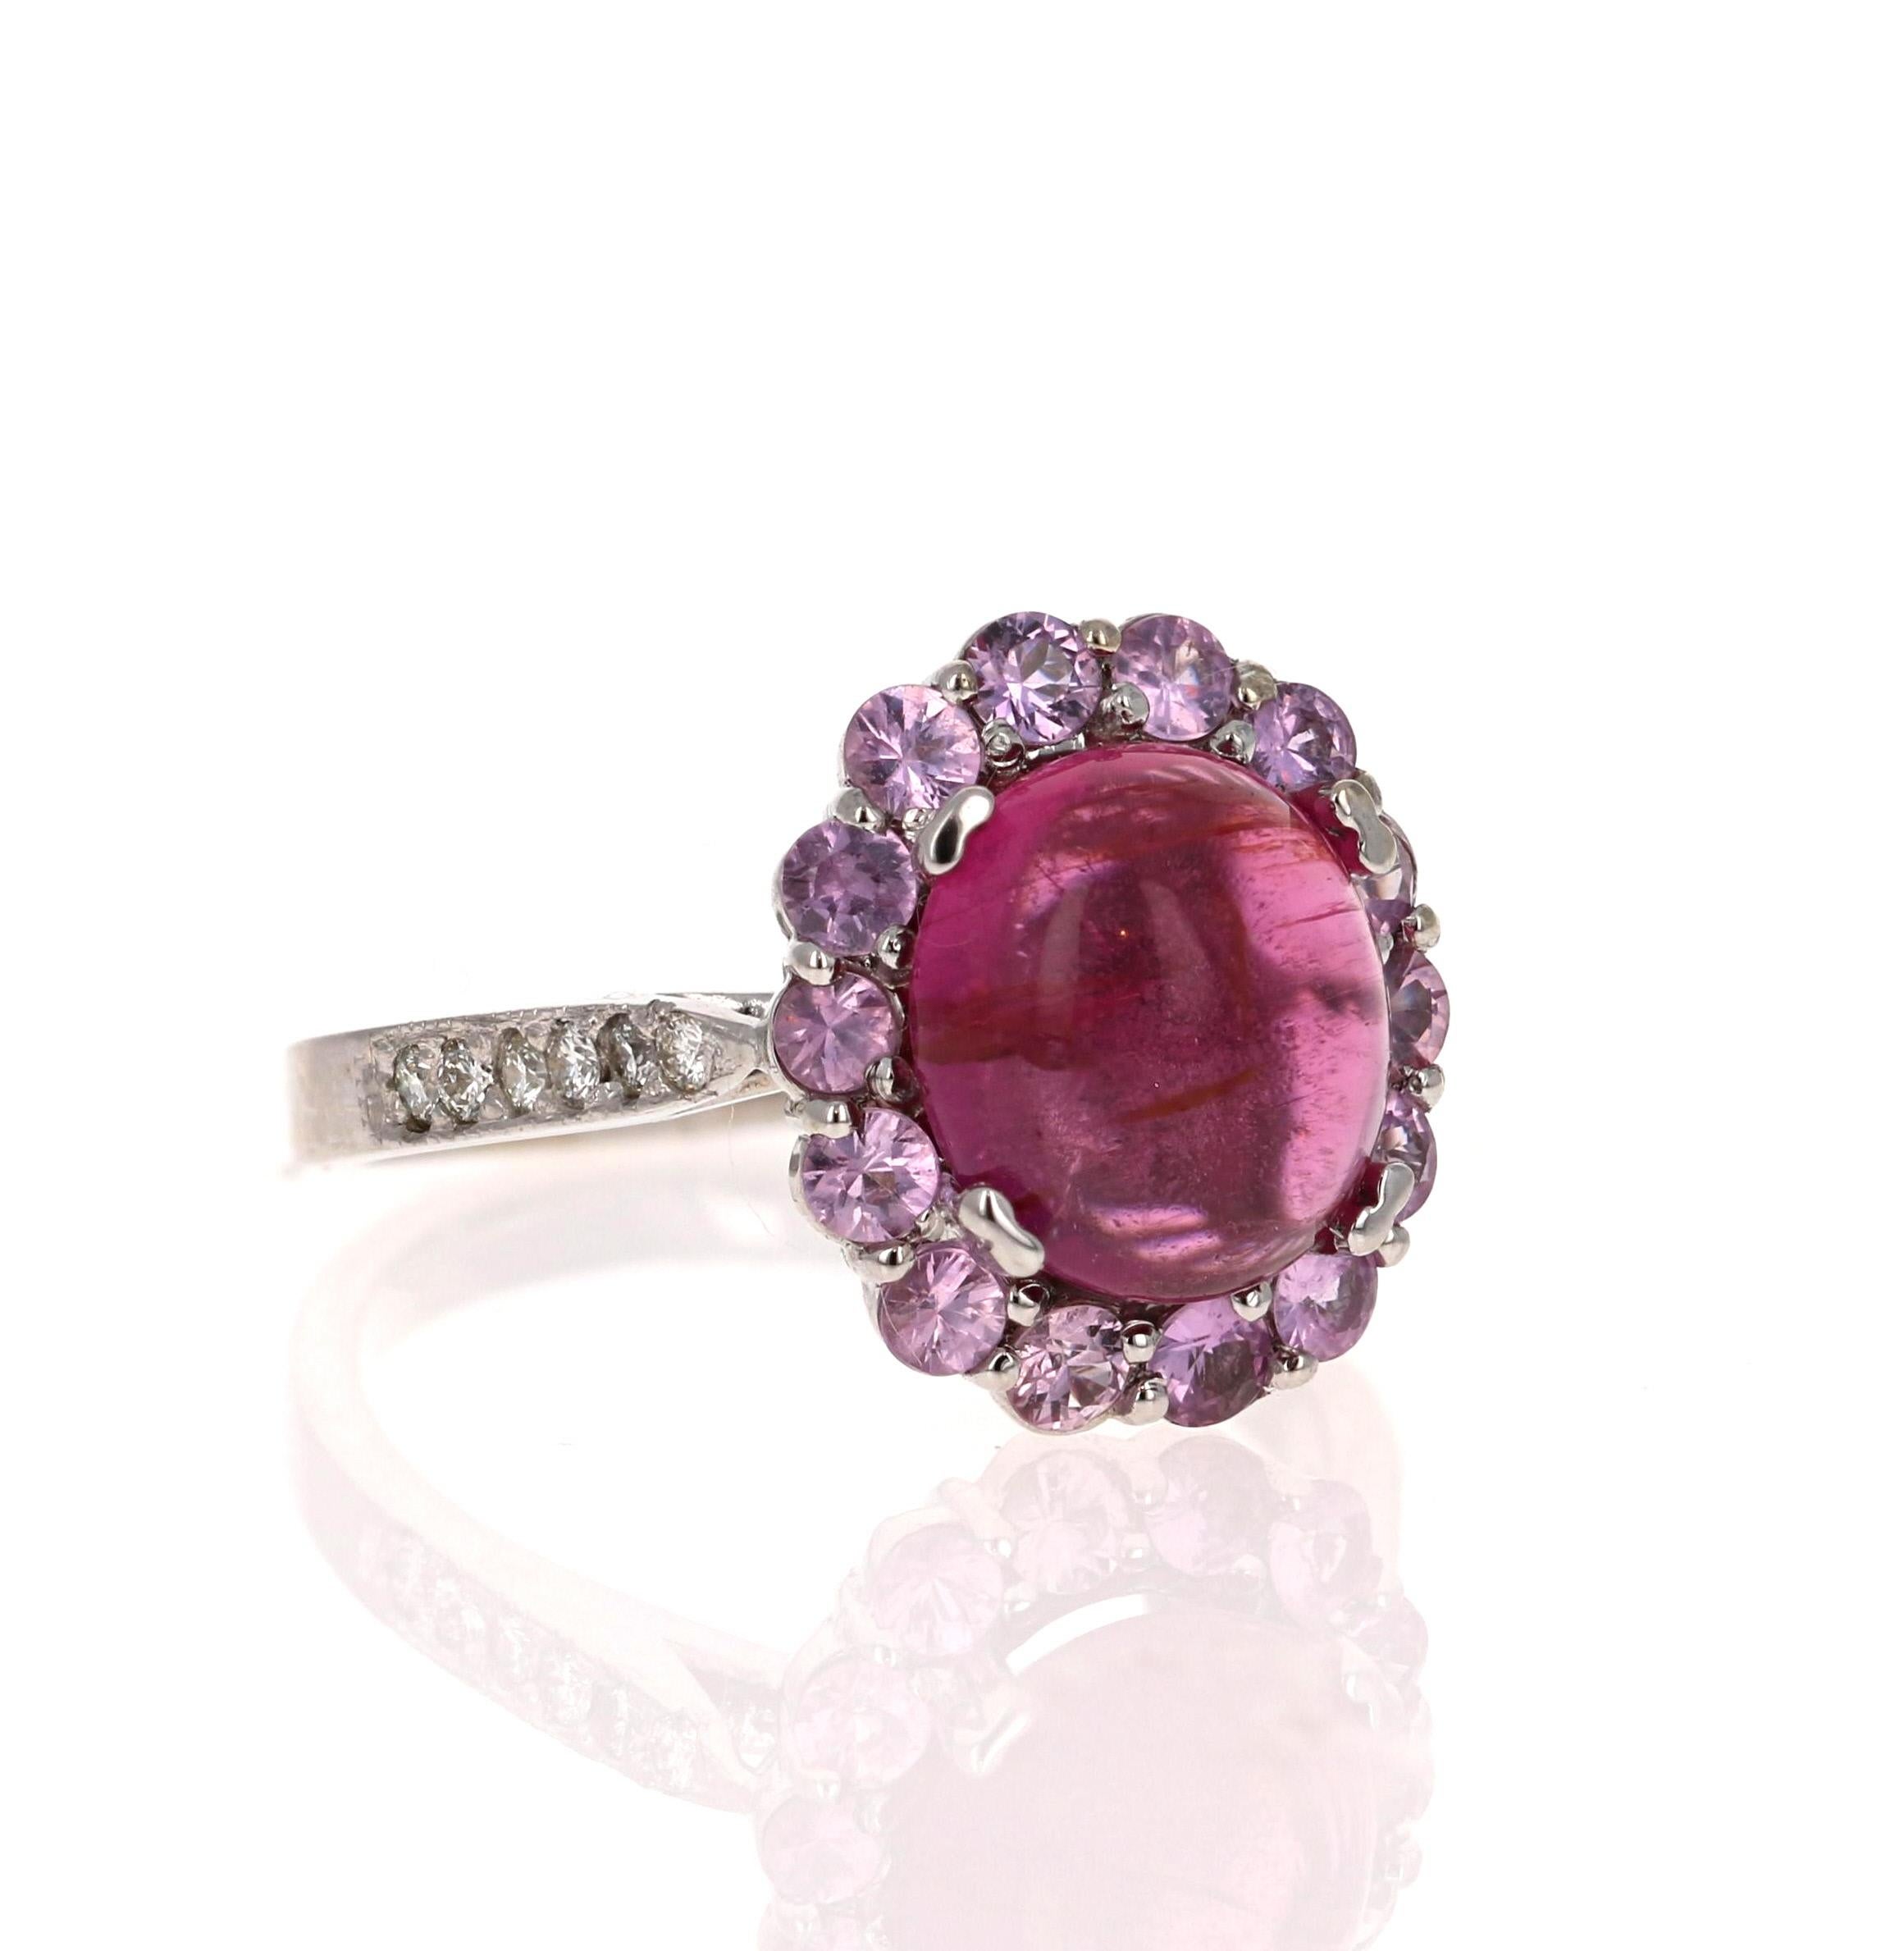 Beautiful and Radiant Pink Tourmaline Ring!

This ring has a Cabochon Pink Tourmaline that weighs 3.25 Carats. Floating around the Tourmaline are 14 Pink Sapphires that weigh 0.85 Carats.  Along the shank there are 12 Round Cut Diamonds that weigh